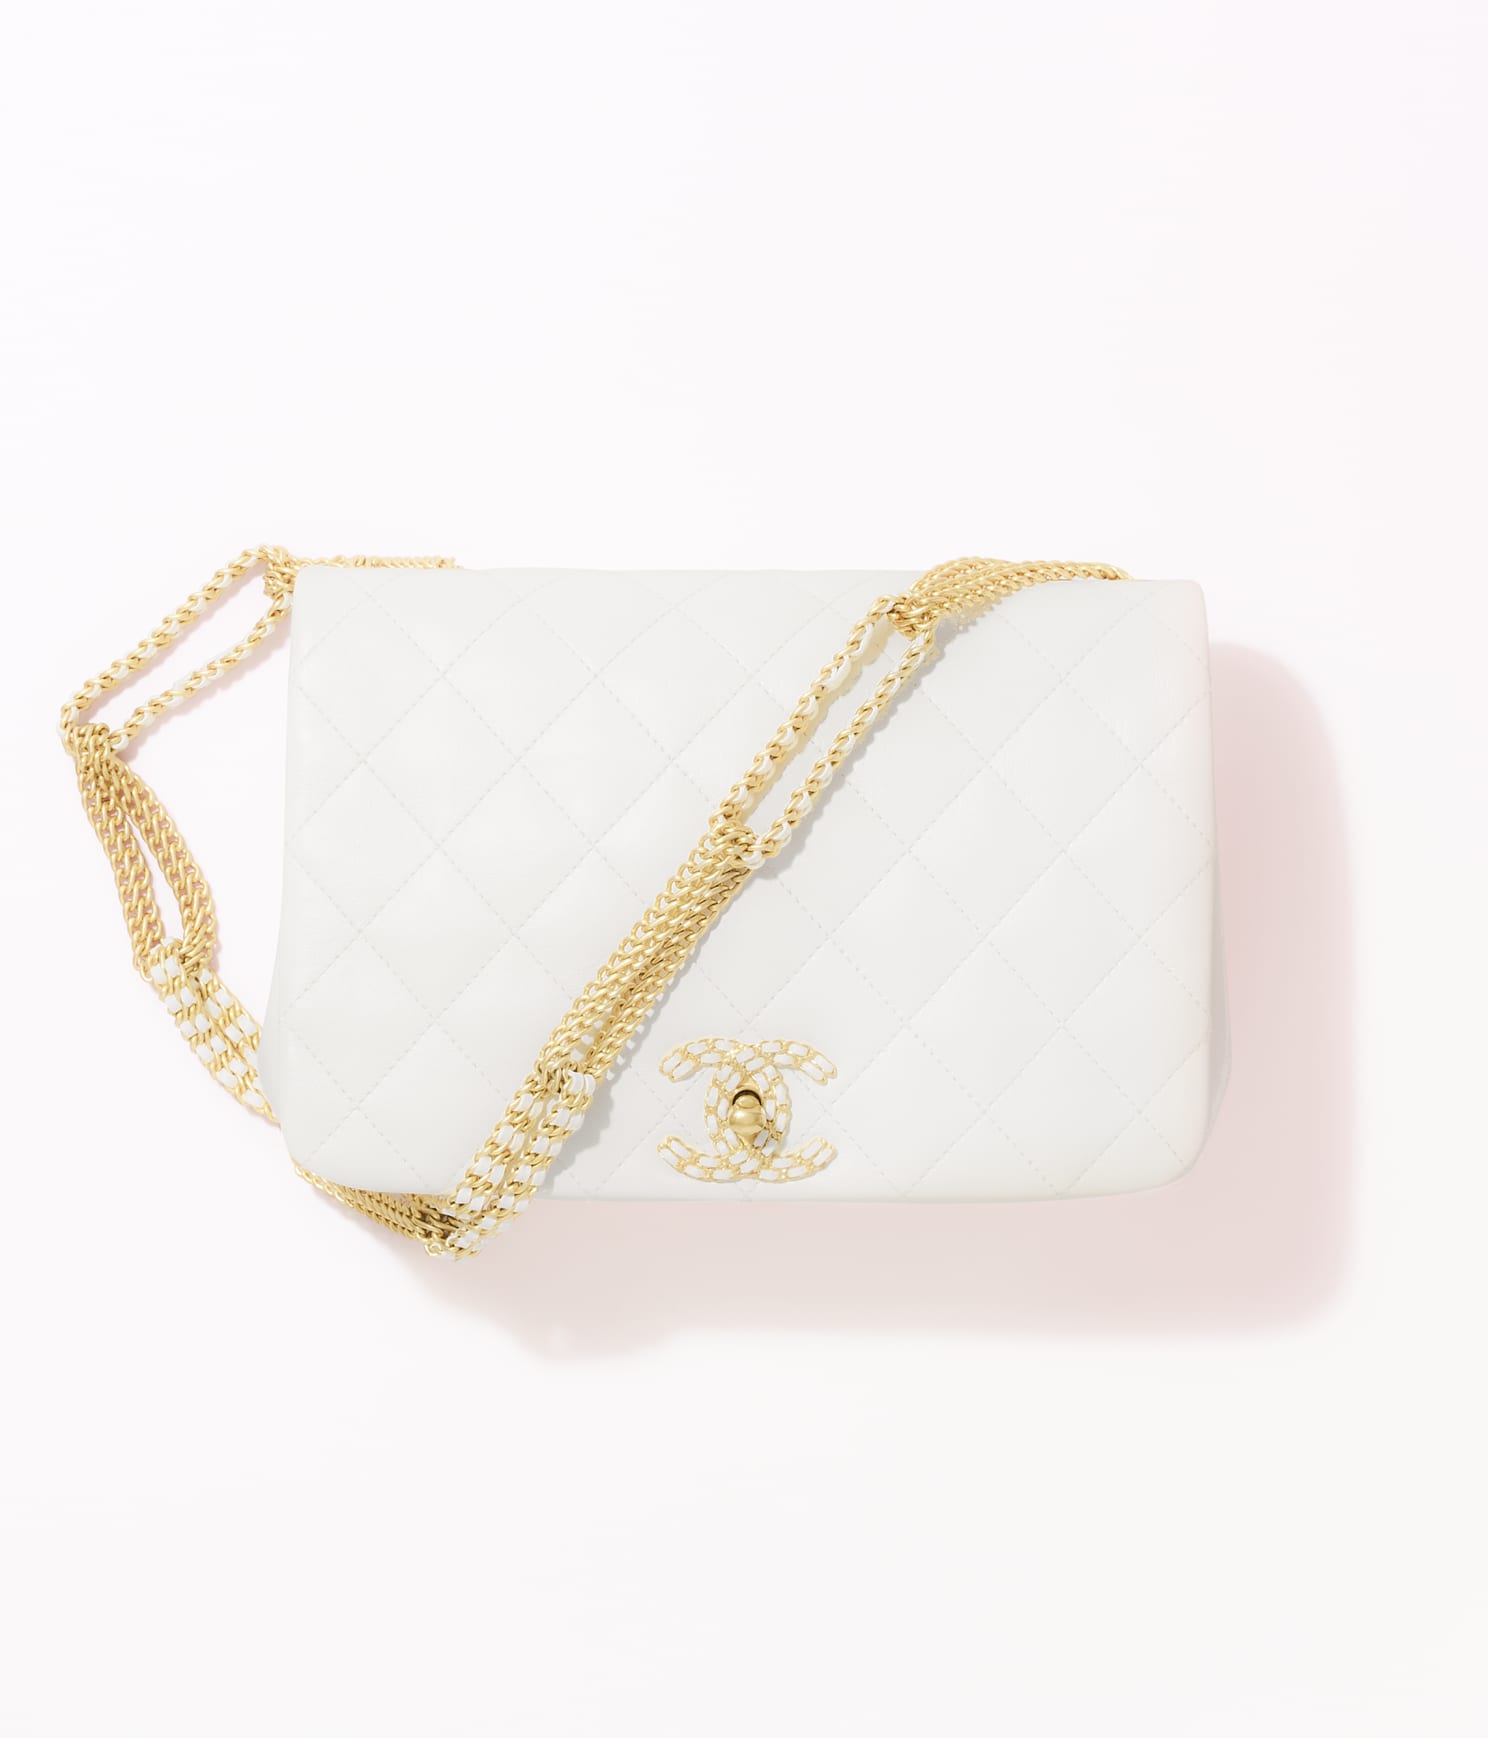 Moressi - Chanel Mini Flap Bag & Brooch • Now Available • Linited